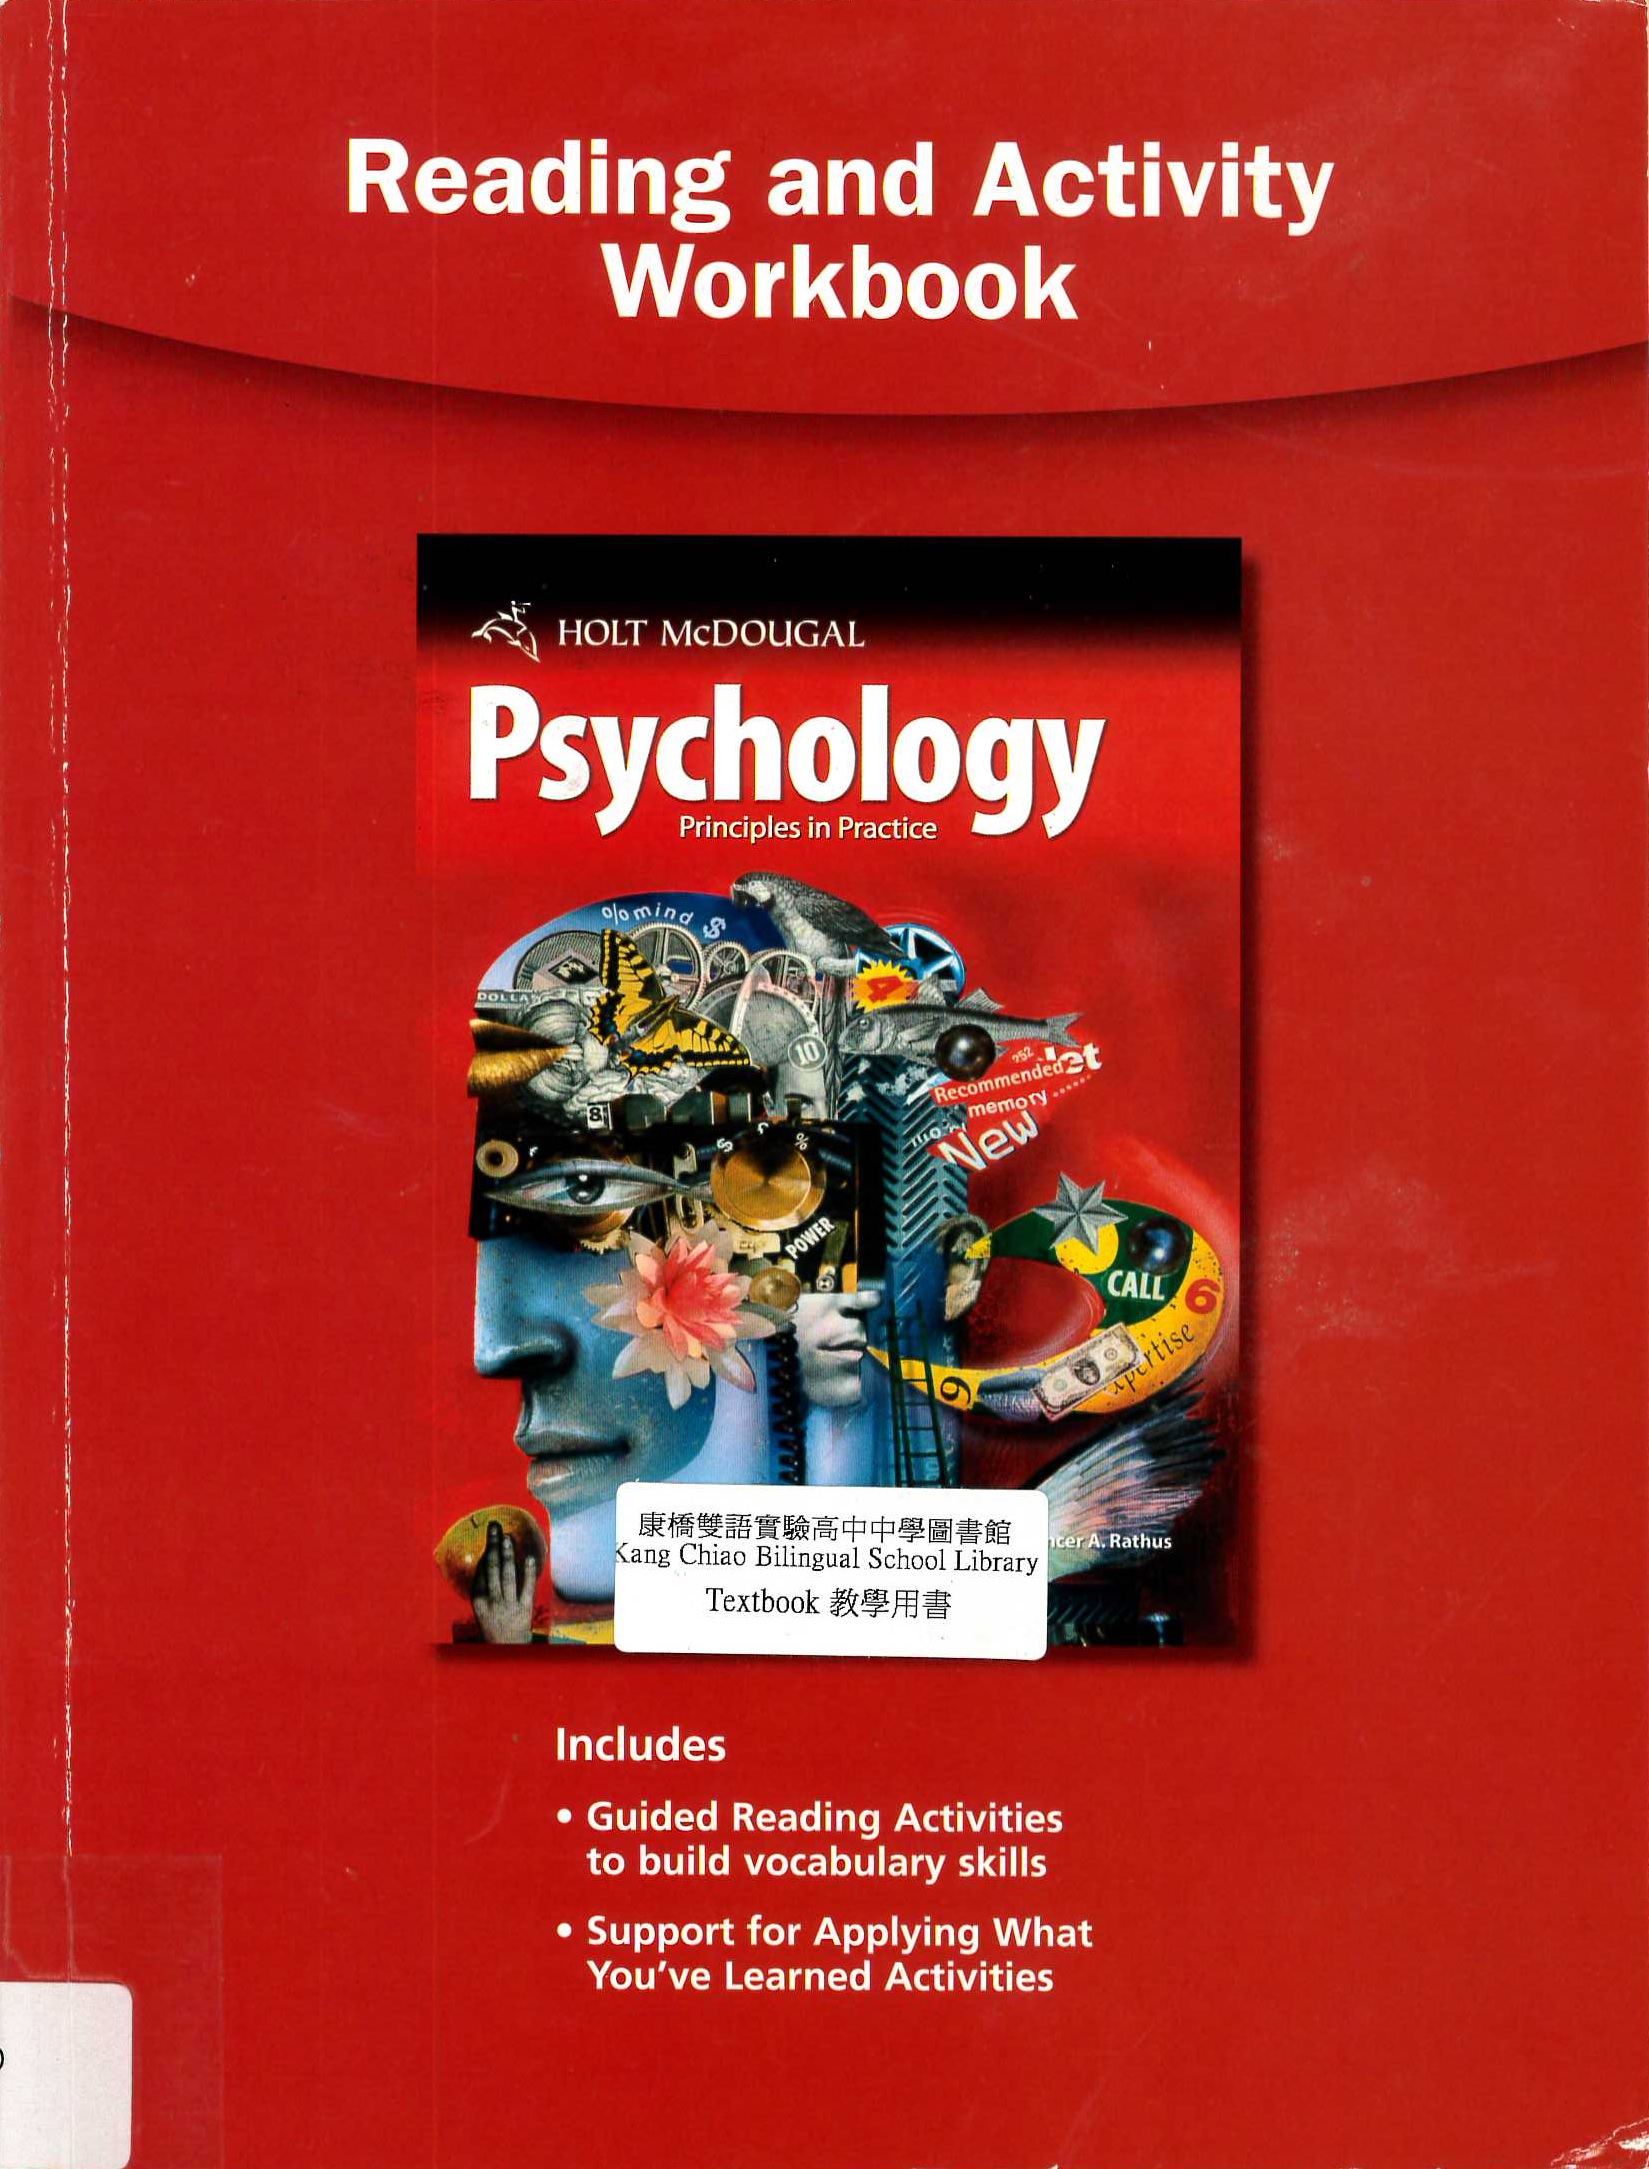 Holt McDougal psychology  : principles in practice : reading and activity workbook